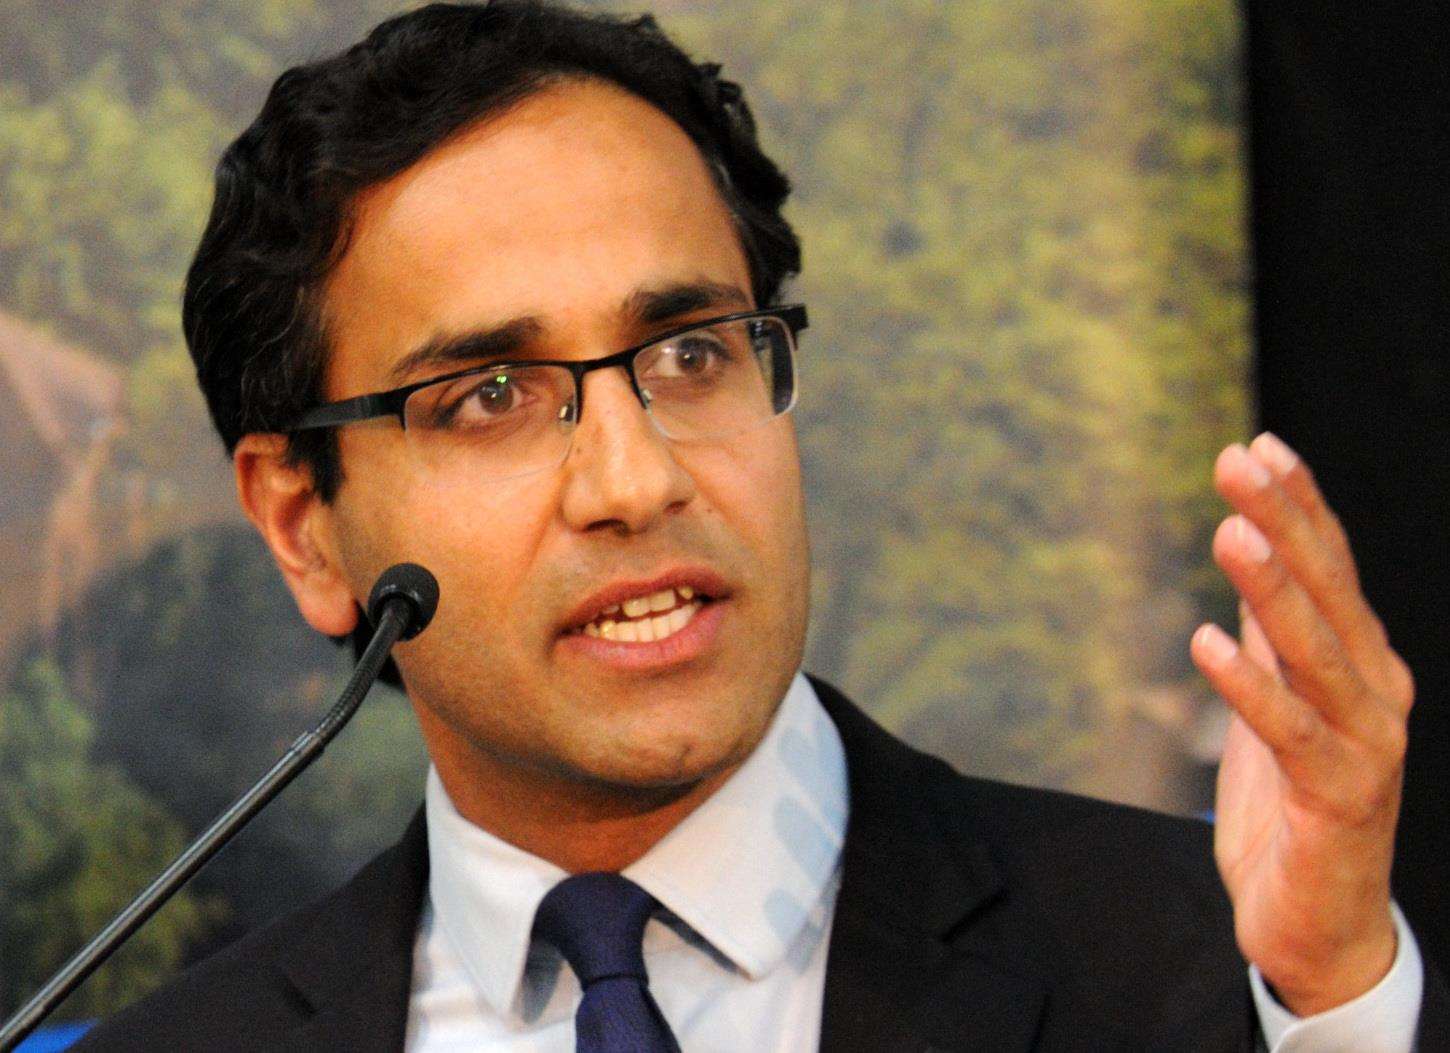 Rehman Chishti has received more than £40,000 in payments from a Riyadh-based think tank